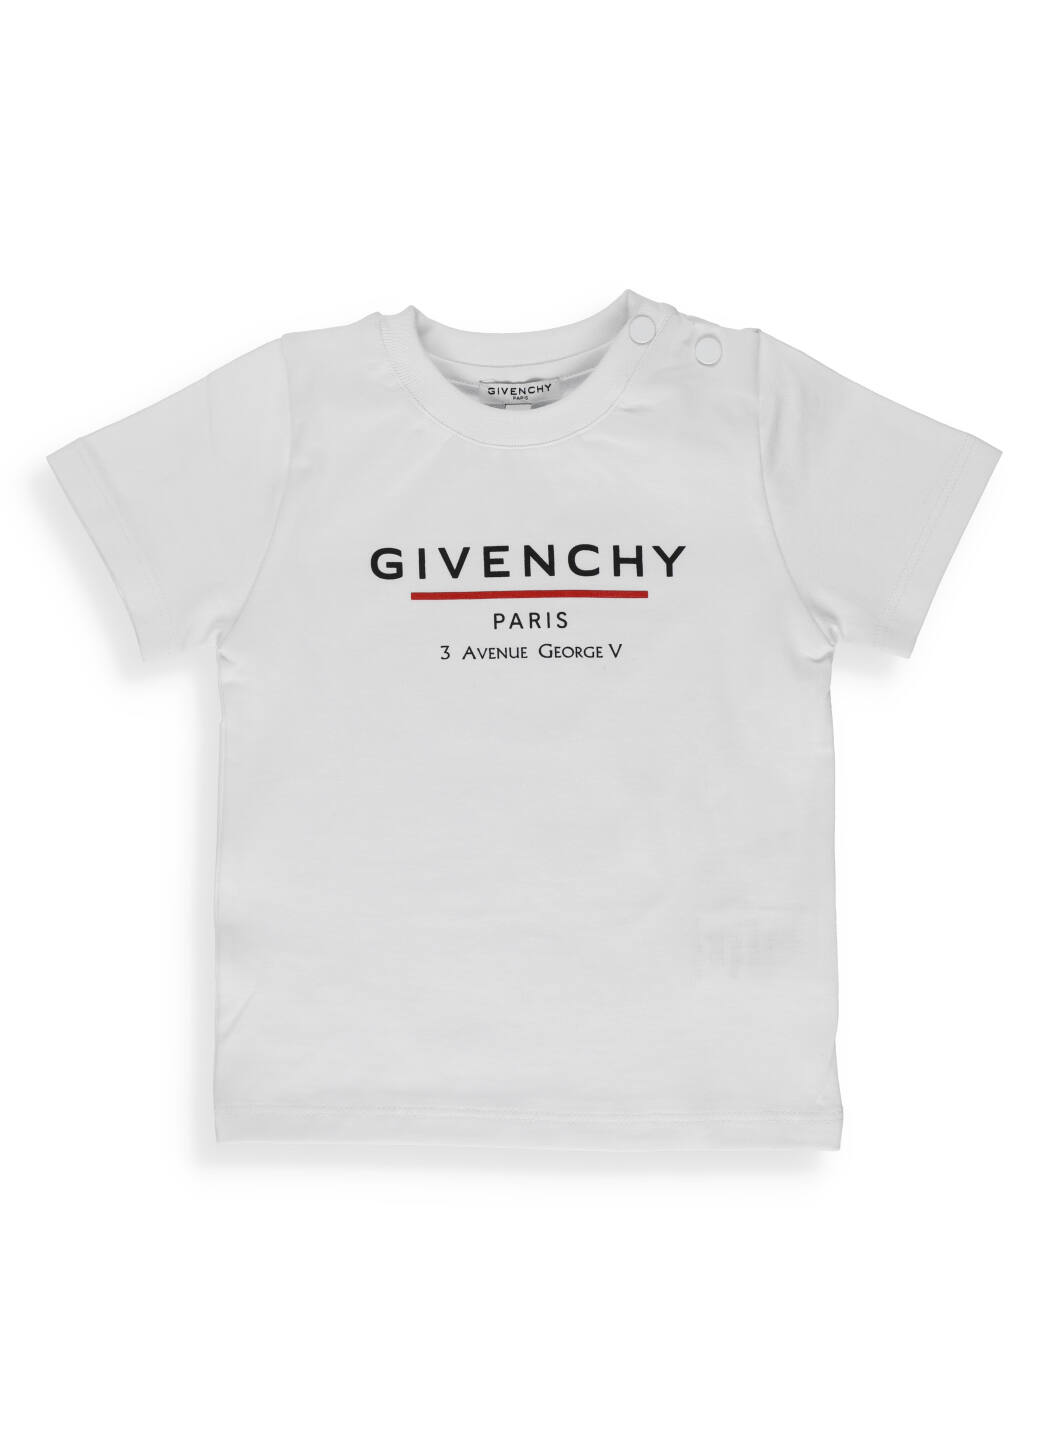 Givenchy Babies' Cotton T-shirt In White